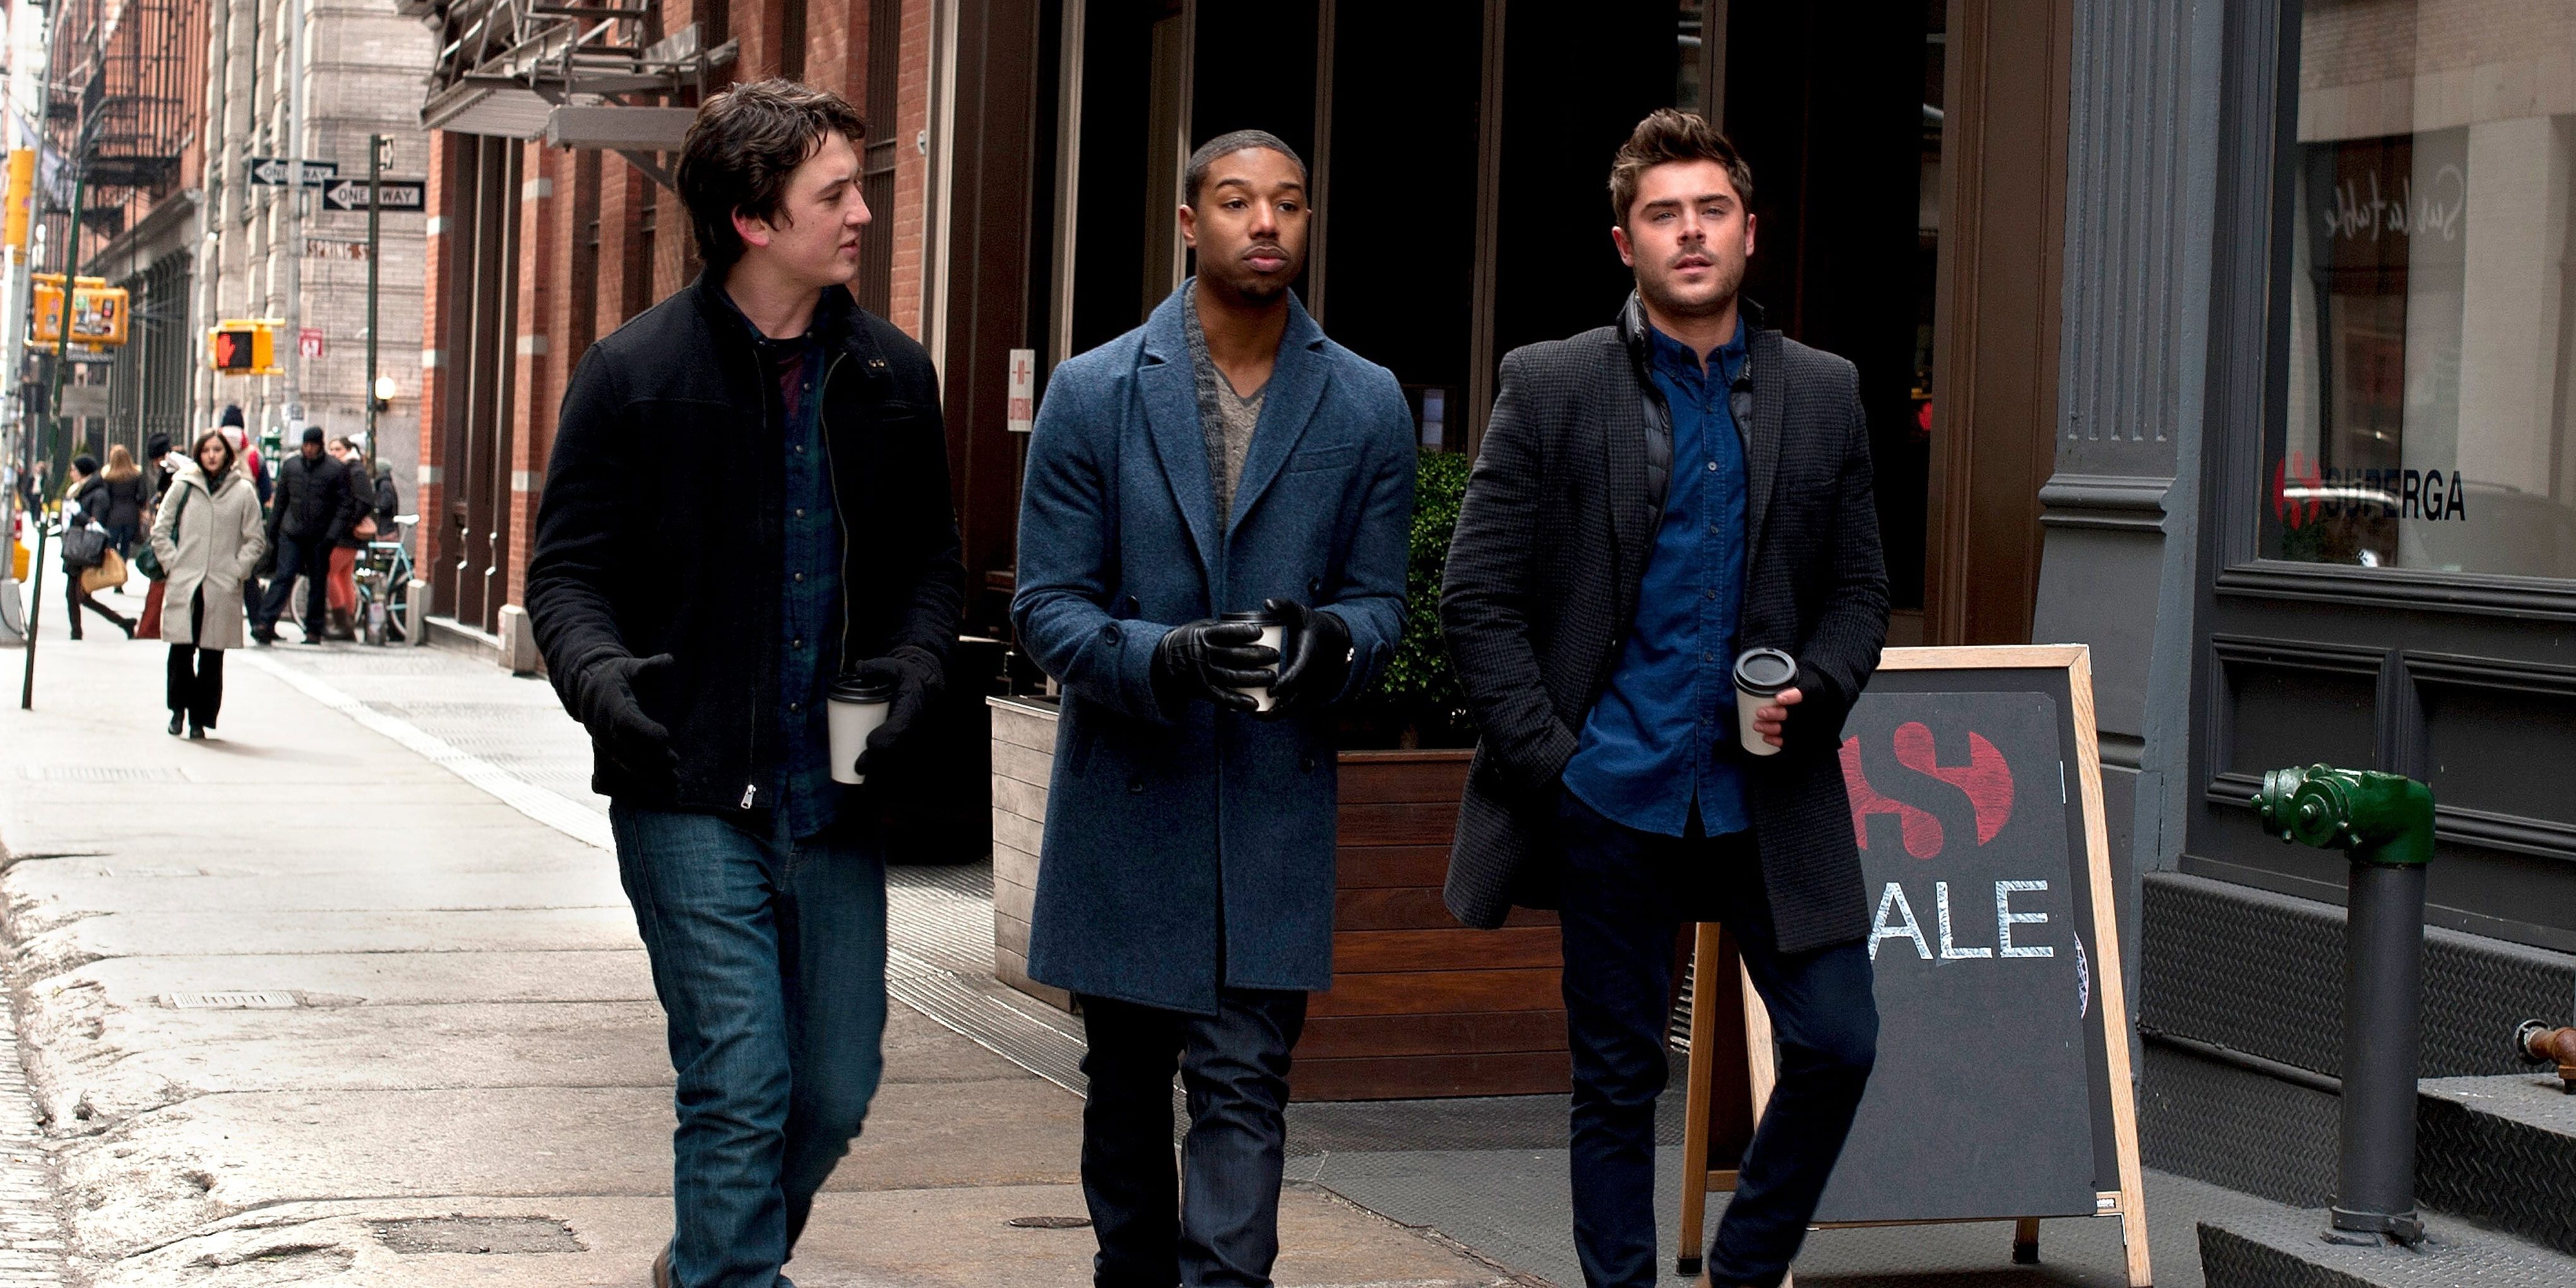 Zac Efron Miles Teller Michael B. Jordan in That Awkward Moment walking together with coffee hand